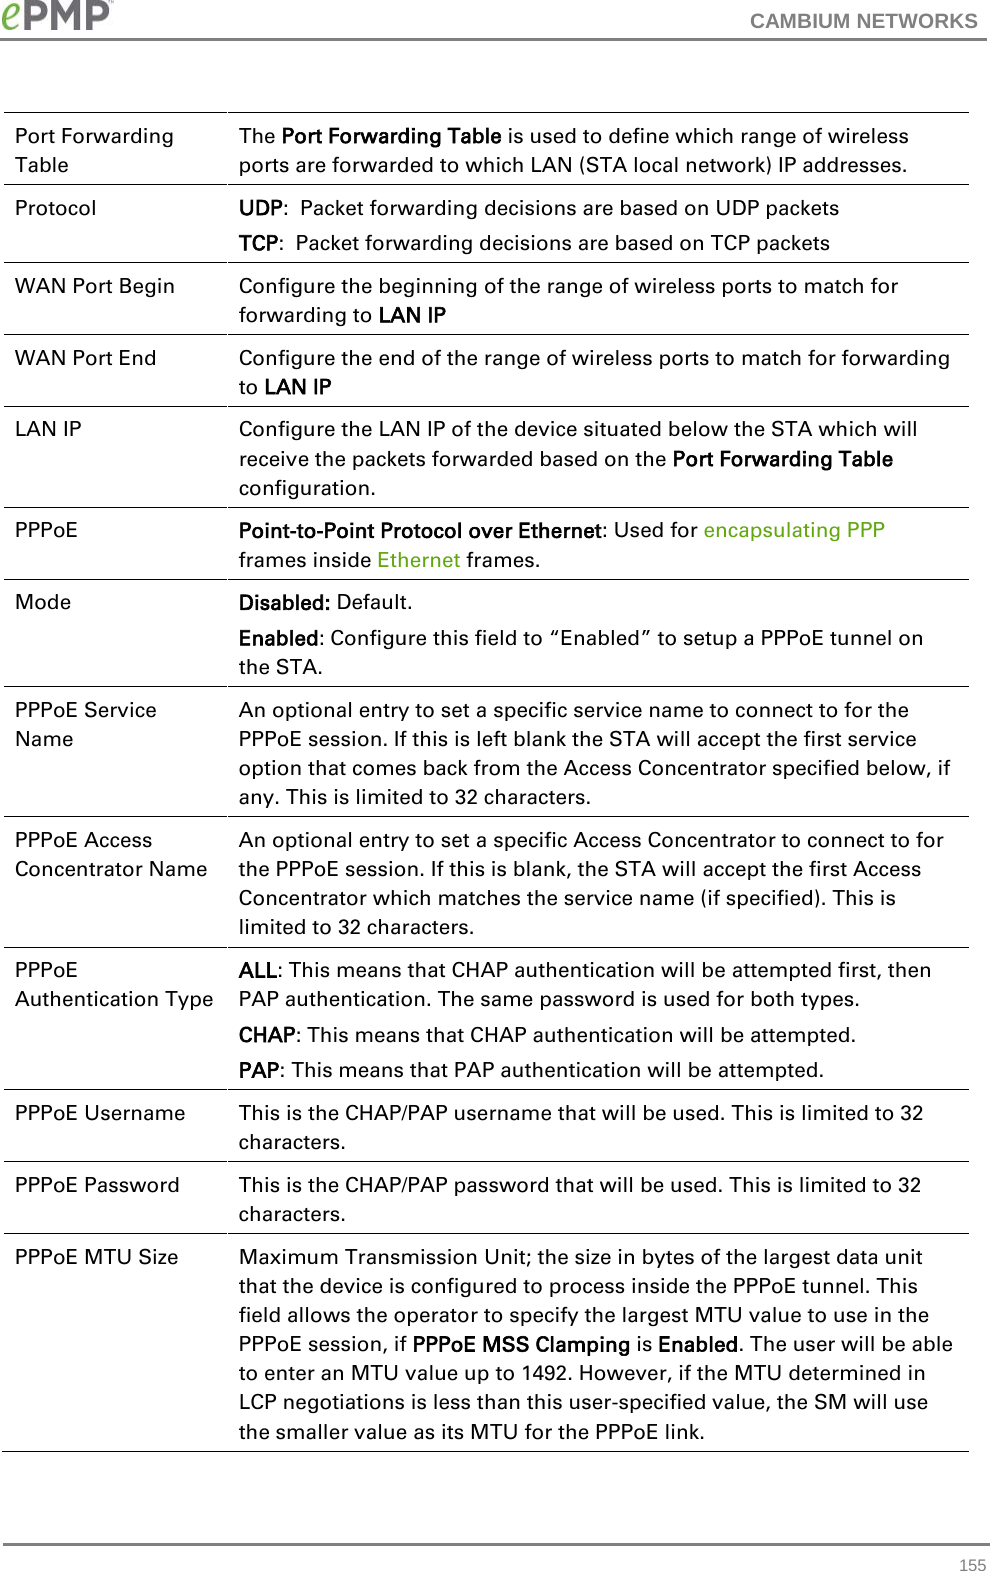 CAMBIUM NETWORKS  Port Forwarding Table The Port Forwarding Table is used to define which range of wireless ports are forwarded to which LAN (STA local network) IP addresses. Protocol UDP:  Packet forwarding decisions are based on UDP packets TCP:  Packet forwarding decisions are based on TCP packets WAN Port Begin Configure the beginning of the range of wireless ports to match for forwarding to LAN IP WAN Port End Configure the end of the range of wireless ports to match for forwarding to LAN IP LAN IP Configure the LAN IP of the device situated below the STA which will receive the packets forwarded based on the Port Forwarding Table configuration. PPPoE Point-to-Point Protocol over Ethernet: Used for encapsulating PPP frames inside Ethernet frames. Mode Disabled: Default. Enabled: Configure this field to “Enabled” to setup a PPPoE tunnel on the STA. PPPoE Service Name An optional entry to set a specific service name to connect to for the PPPoE session. If this is left blank the STA will accept the first service option that comes back from the Access Concentrator specified below, if any. This is limited to 32 characters. PPPoE Access Concentrator Name An optional entry to set a specific Access Concentrator to connect to for the PPPoE session. If this is blank, the STA will accept the first Access Concentrator which matches the service name (if specified). This is limited to 32 characters. PPPoE Authentication Type ALL: This means that CHAP authentication will be attempted first, then PAP authentication. The same password is used for both types. CHAP: This means that CHAP authentication will be attempted. PAP: This means that PAP authentication will be attempted. PPPoE Username This is the CHAP/PAP username that will be used. This is limited to 32 characters. PPPoE Password This is the CHAP/PAP password that will be used. This is limited to 32 characters. PPPoE MTU Size Maximum Transmission Unit; the size in bytes of the largest data unit that the device is configured to process inside the PPPoE tunnel. This field allows the operator to specify the largest MTU value to use in the PPPoE session, if PPPoE MSS Clamping is Enabled. The user will be able to enter an MTU value up to 1492. However, if the MTU determined in LCP negotiations is less than this user-specified value, the SM will use the smaller value as its MTU for the PPPoE link.  155 